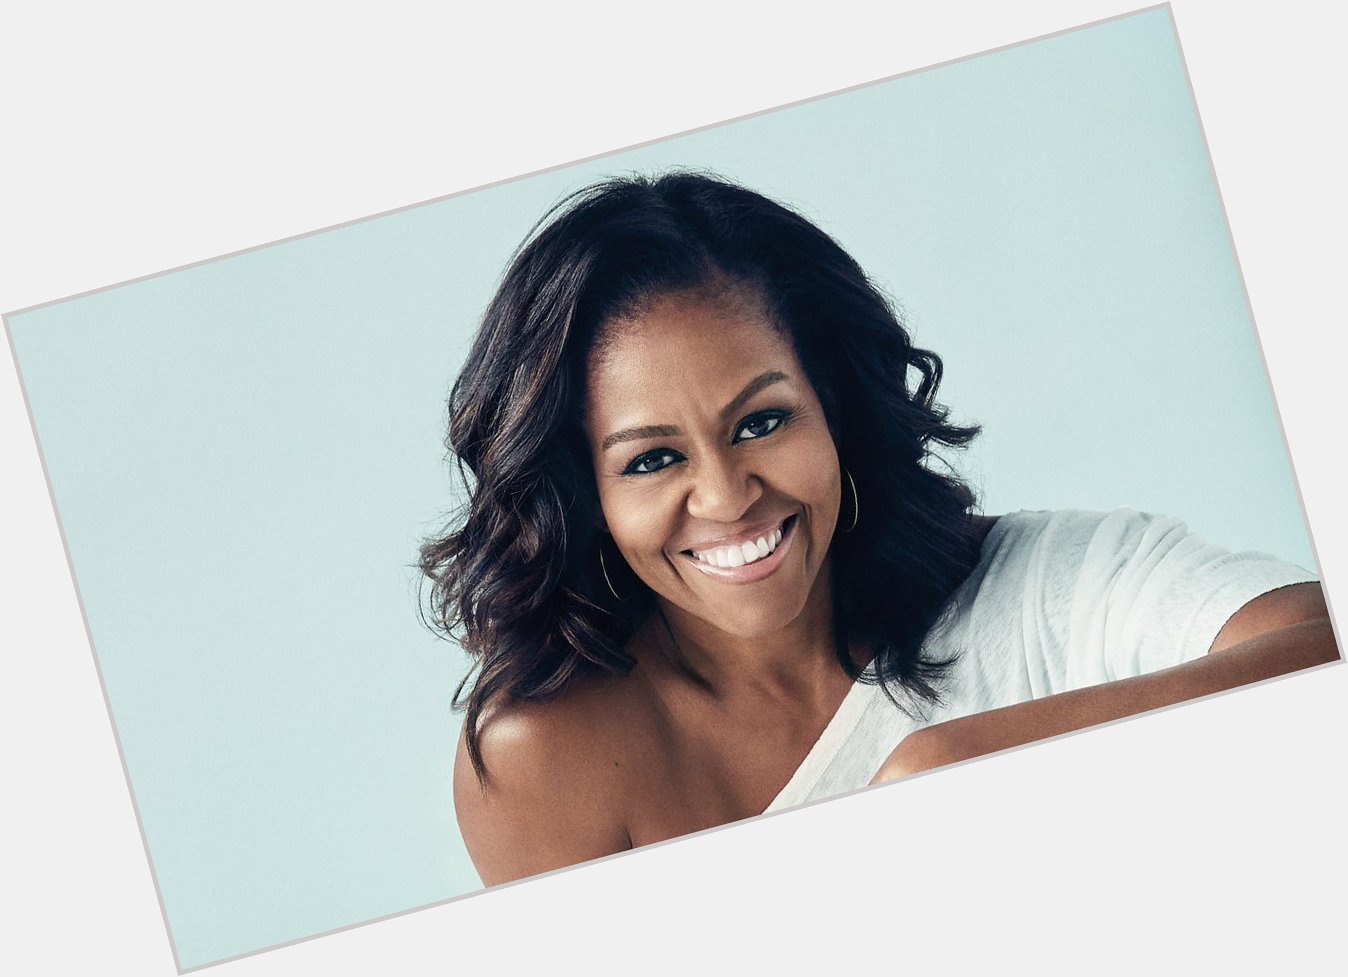 Happy birthday Michelle Obama, one of the best First Ladies to ever reside in the White House! 